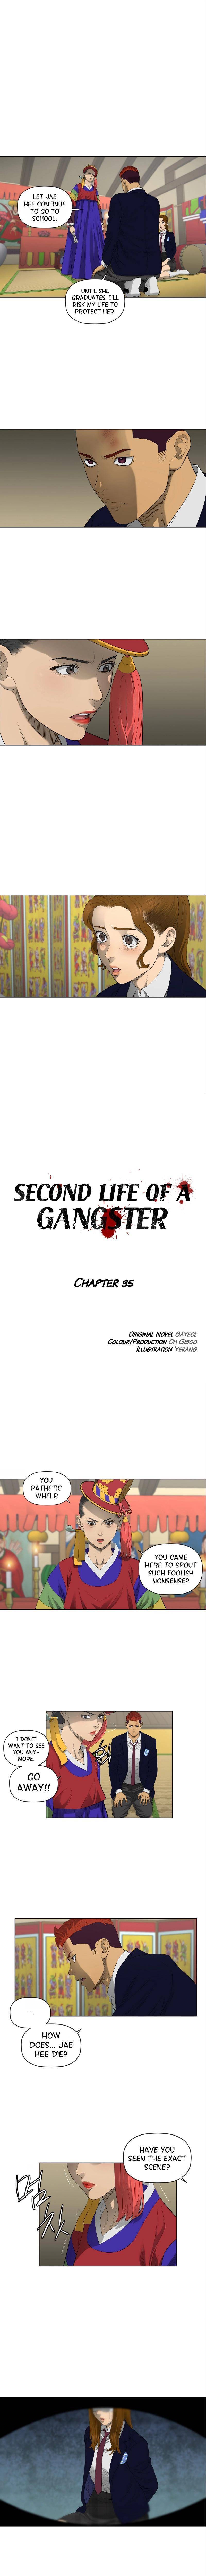 Second Life Of A Gangster - Page 2